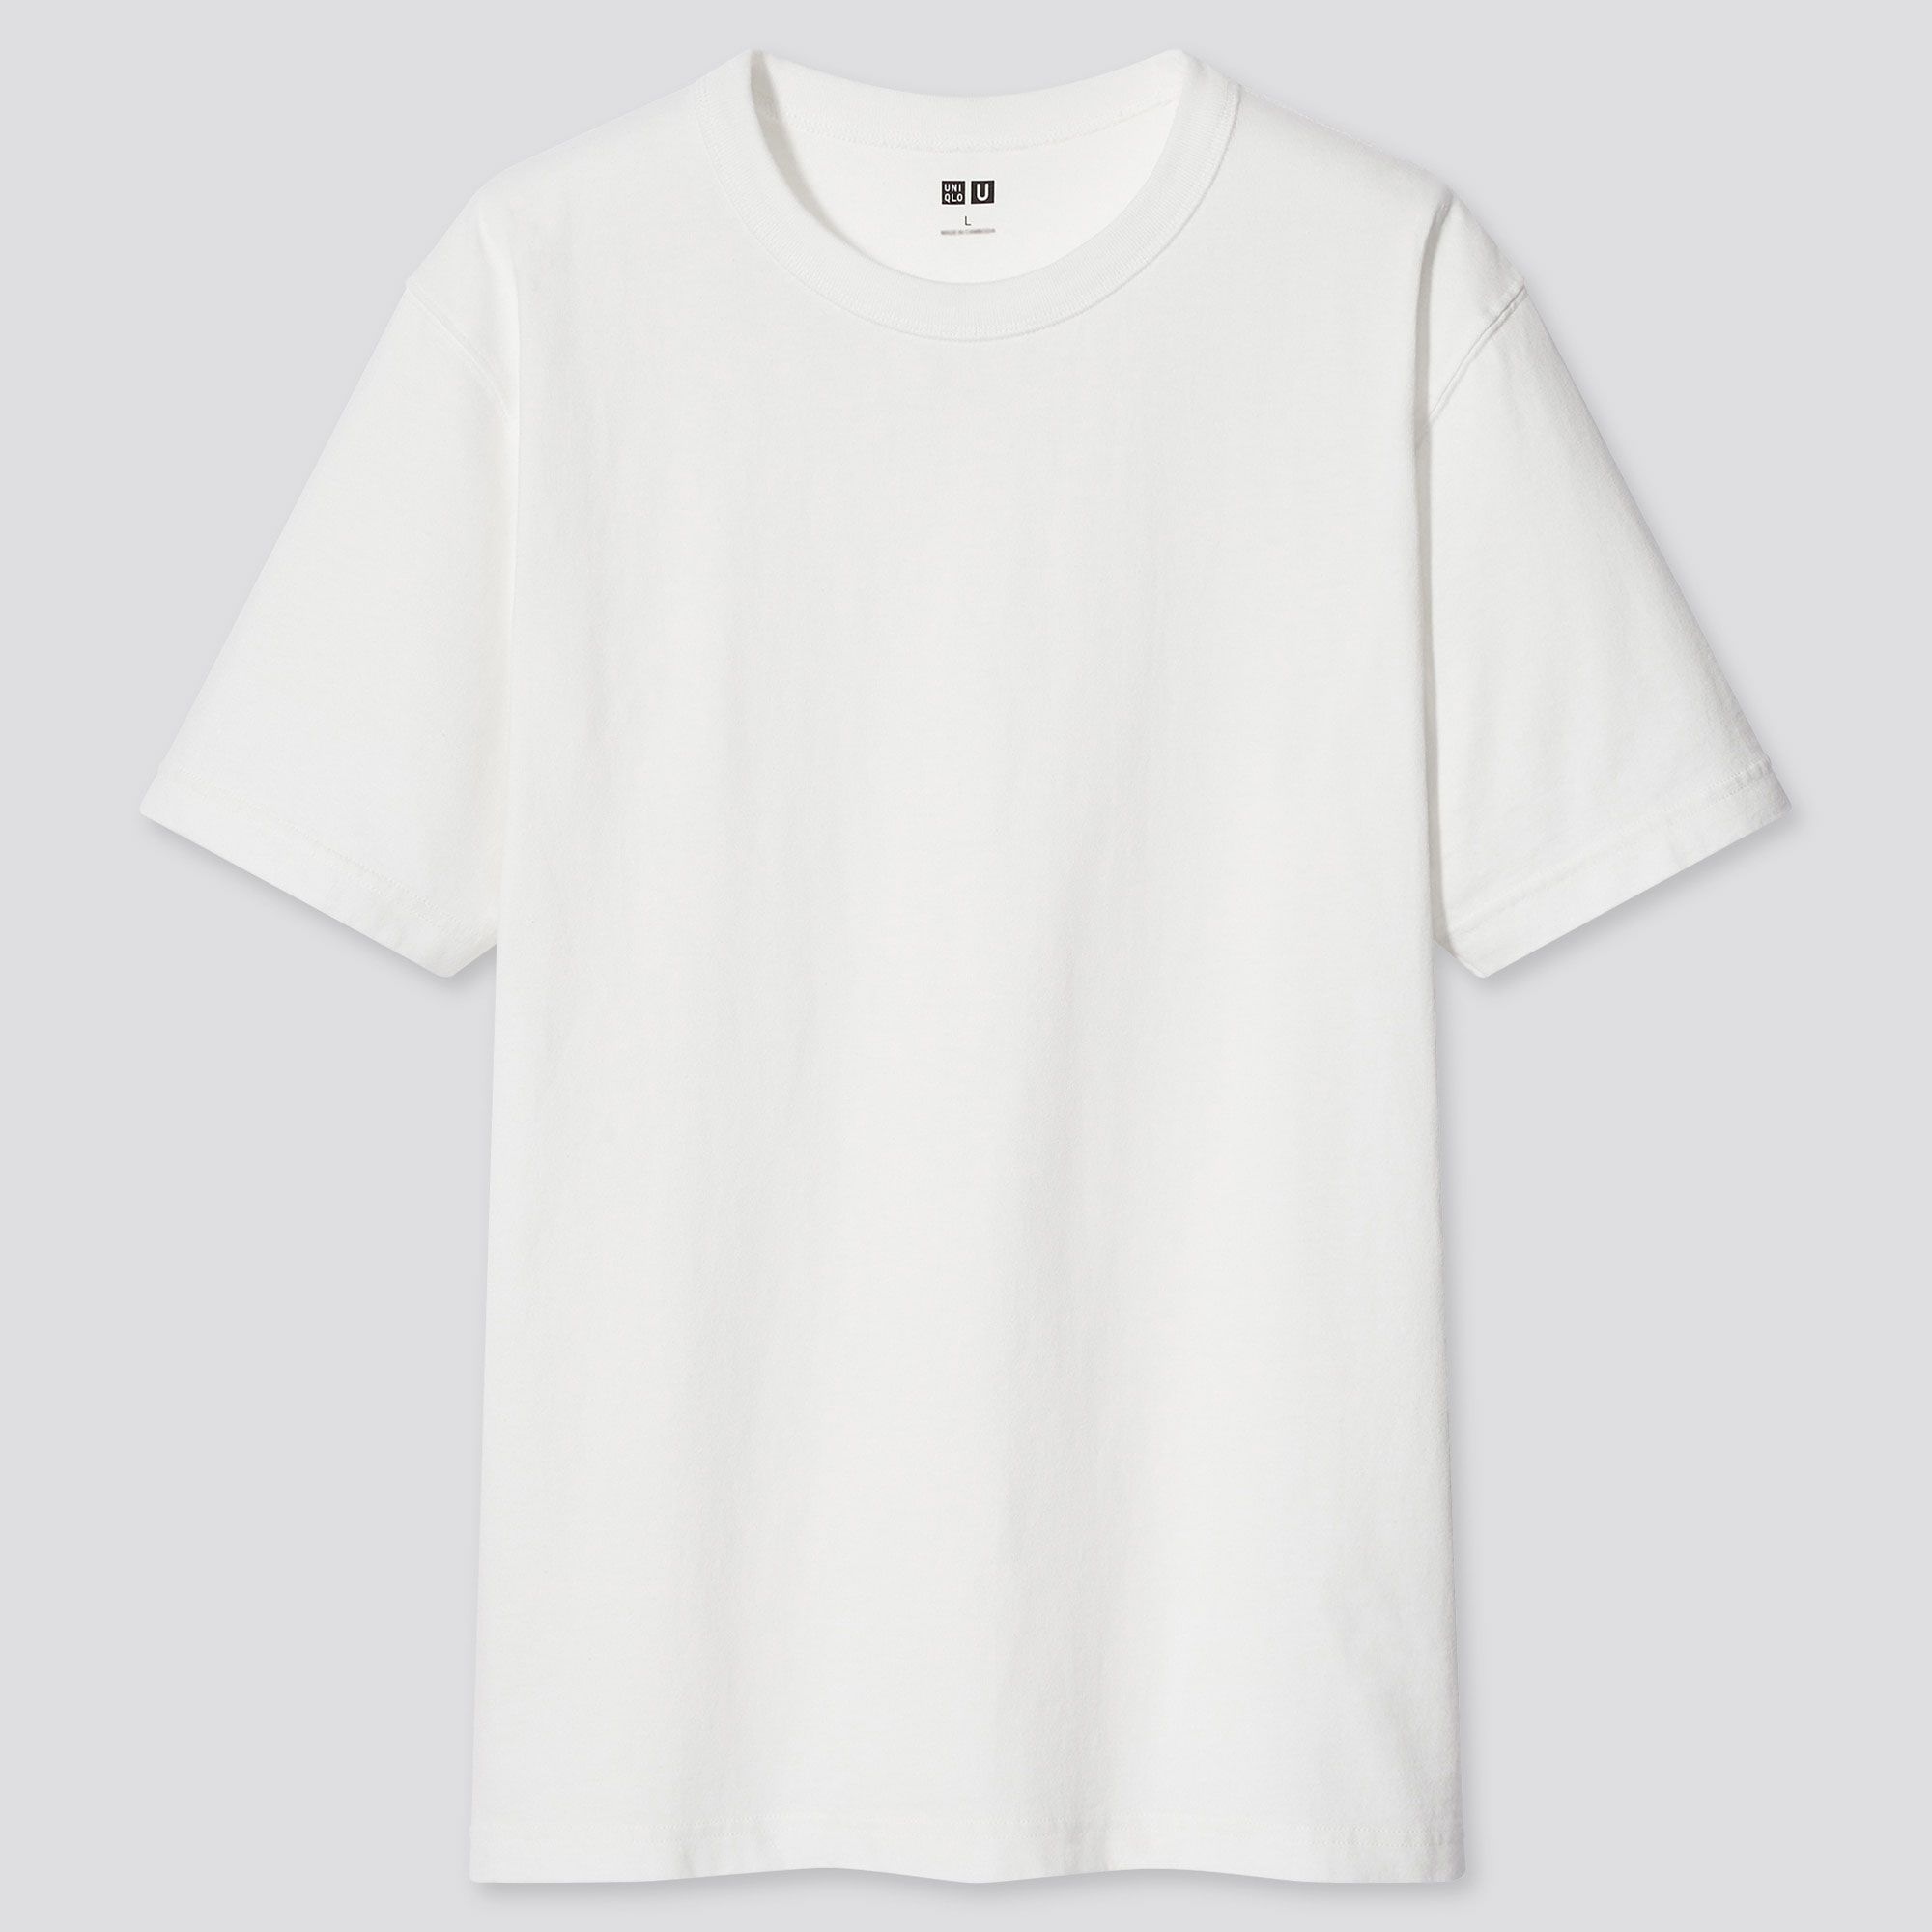 best quality white tees